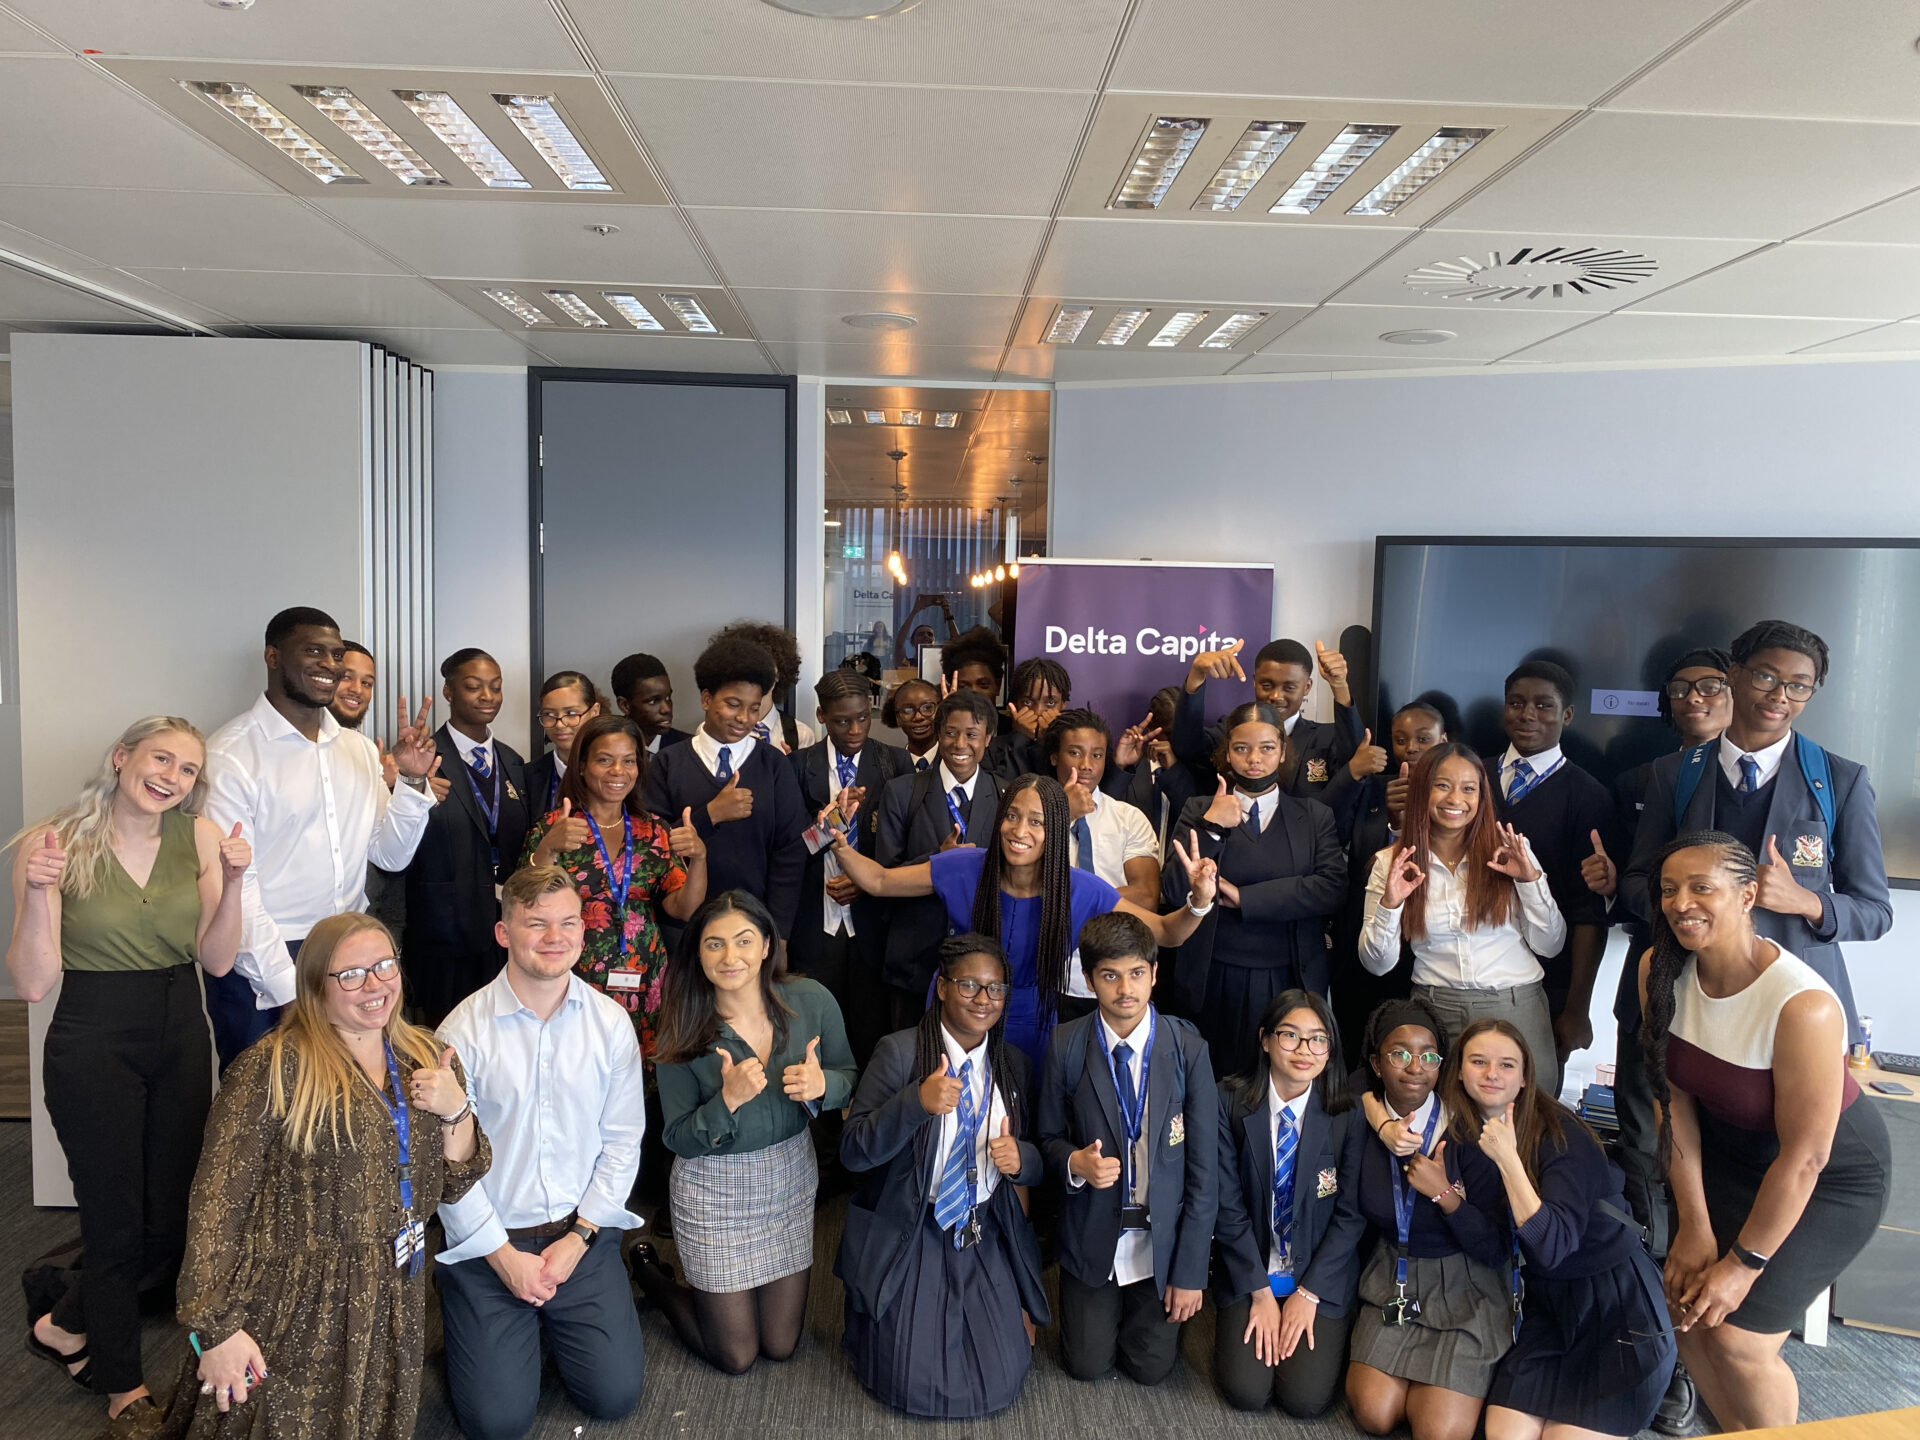 Delta Capita insight day, all the students and role models gathered together for a smiley photo